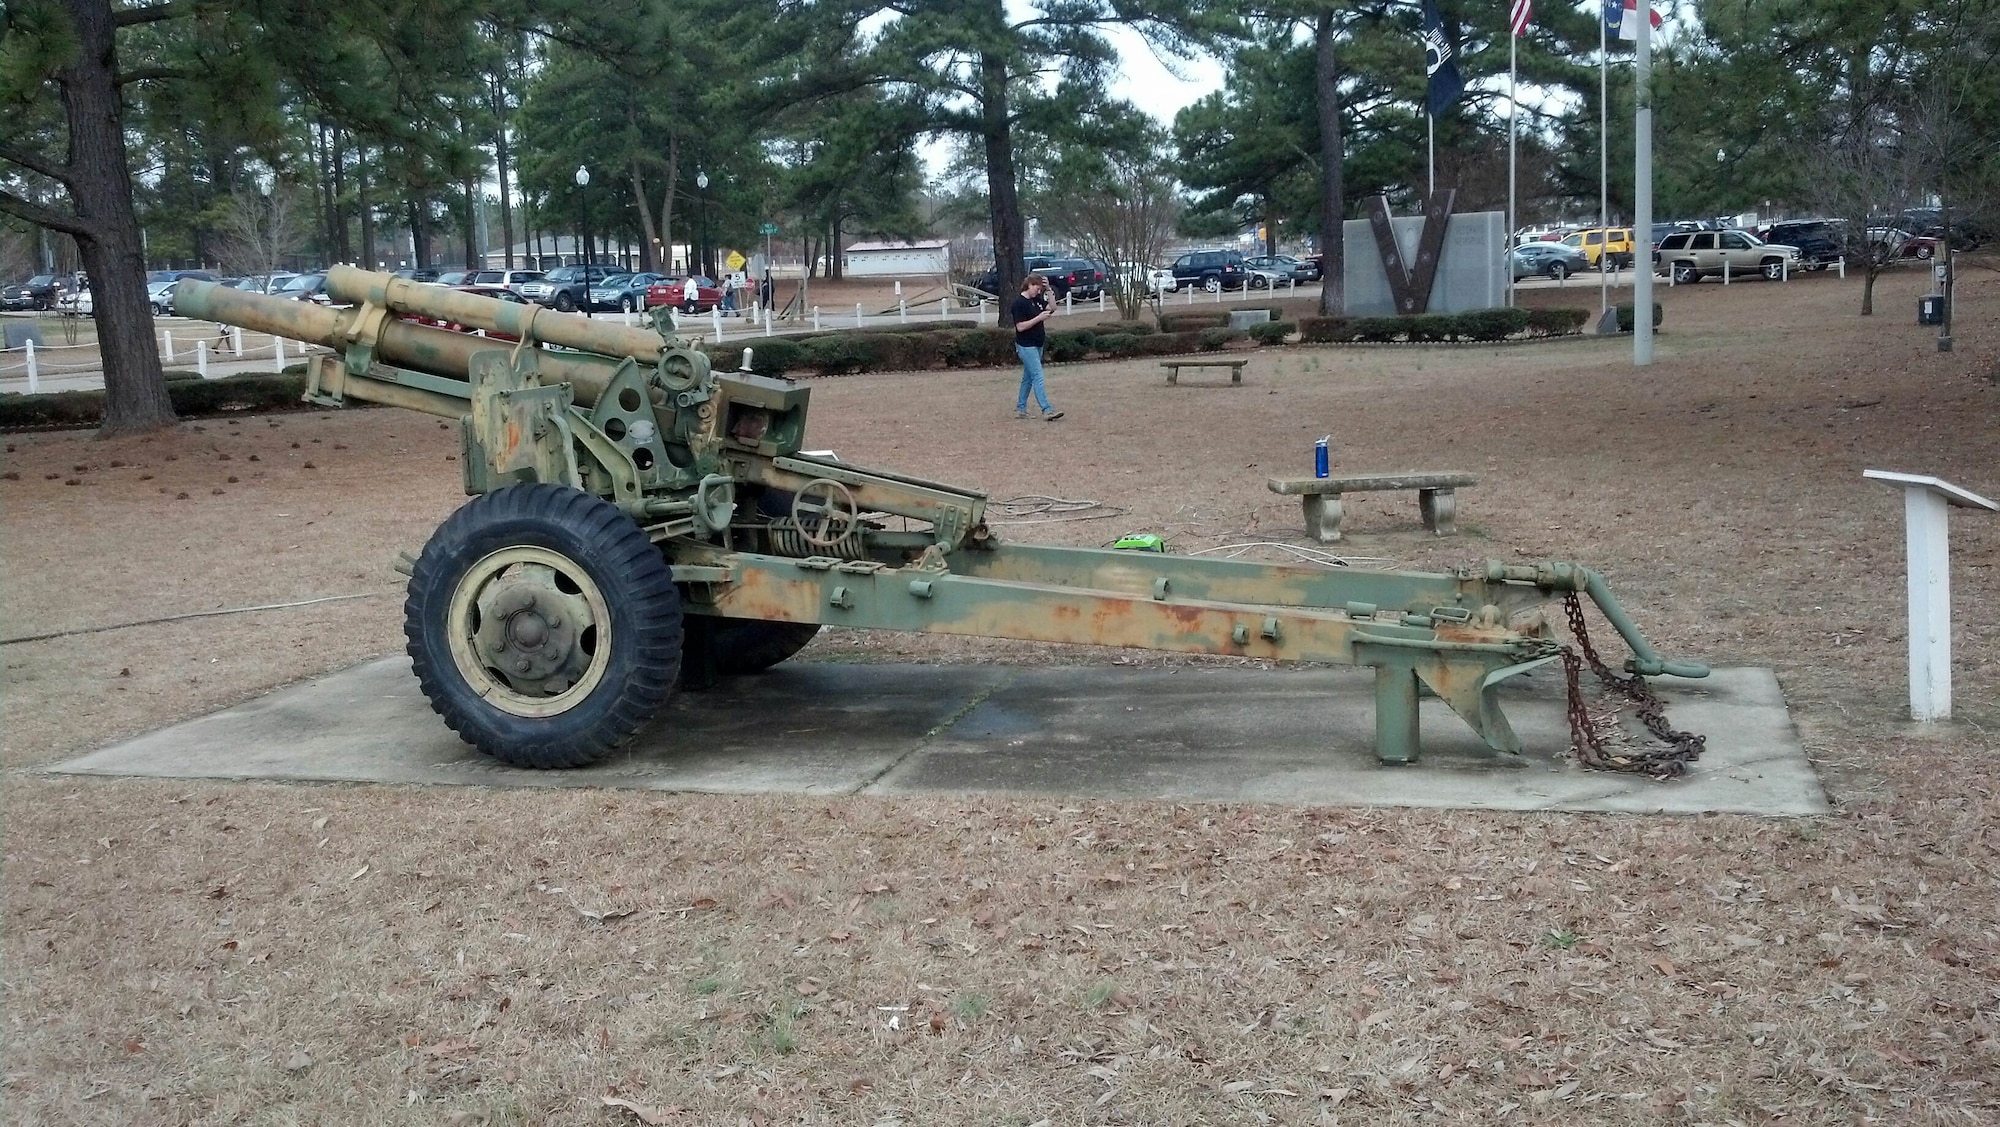 Volunteers from the 440th Maintenance Squadron, Junior Reserve Officer Training Corps. and civilians spent six weekends between December 2012 and April 2013 refurbishing this World War II M101A1 Howitzer 105 Millimeter cannon located at Veteran's Memorial Park in Hope Mills, N.C. This cannon can fire 30 rounds in three minutes, with projectile rounds weighing in at 33 pounds.(U.S. Air Force photo/Senior Airman Brandon Hamilton)